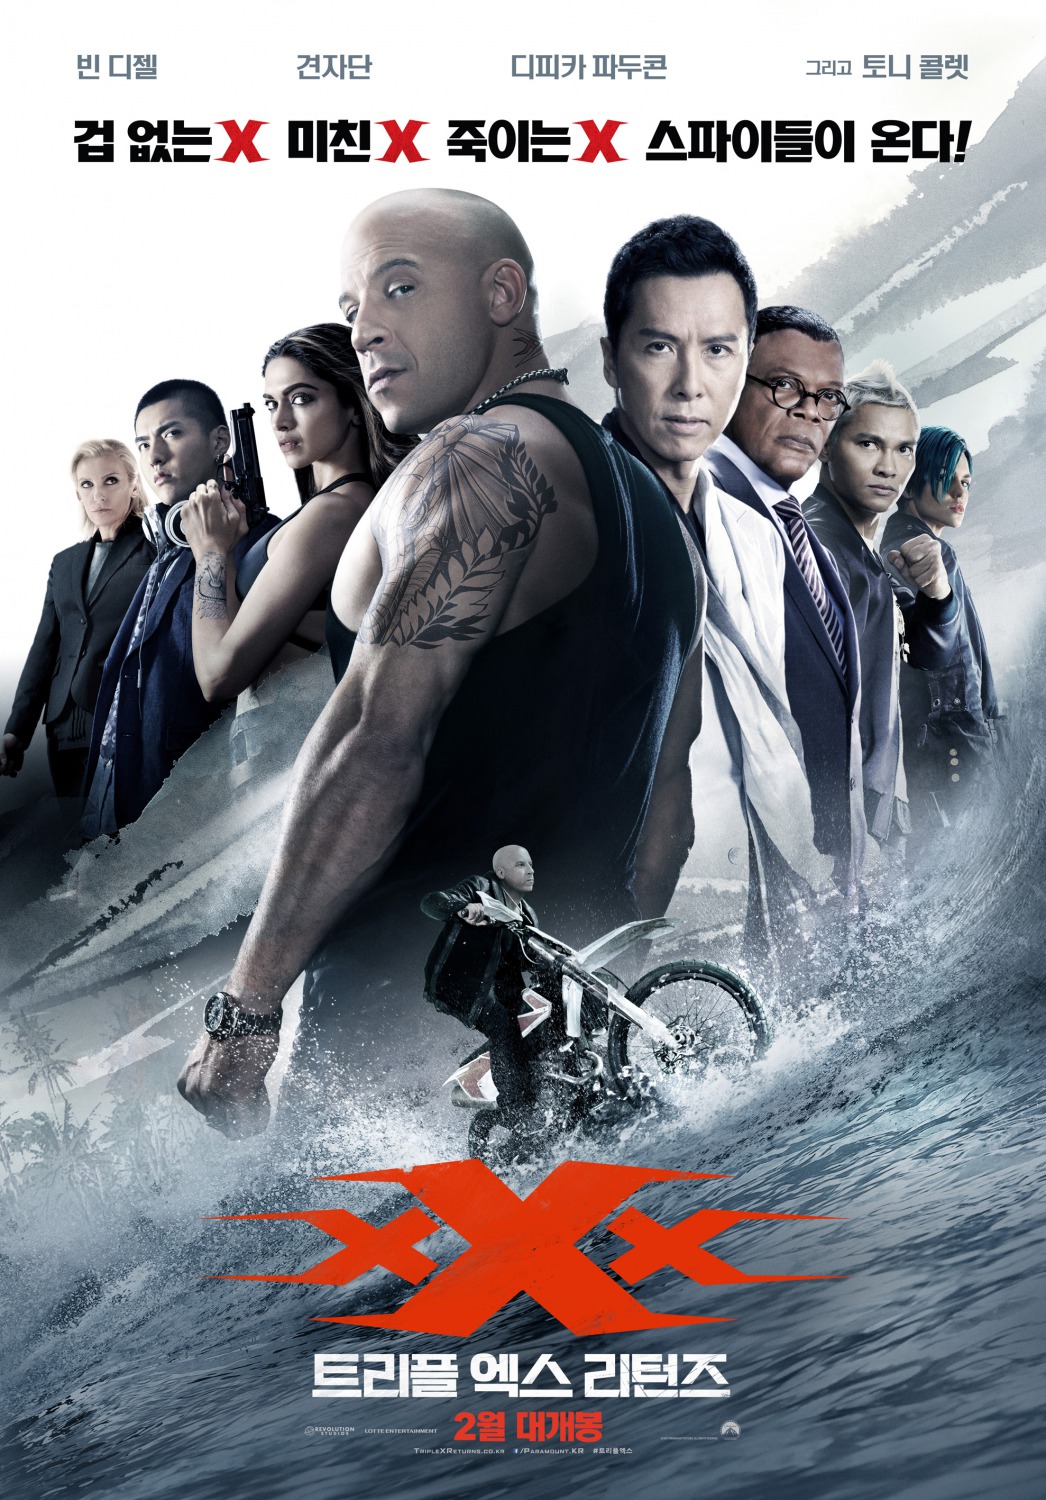 Extra Large Movie Poster Image for xXx: Return of Xander Cage (#17 of 17)